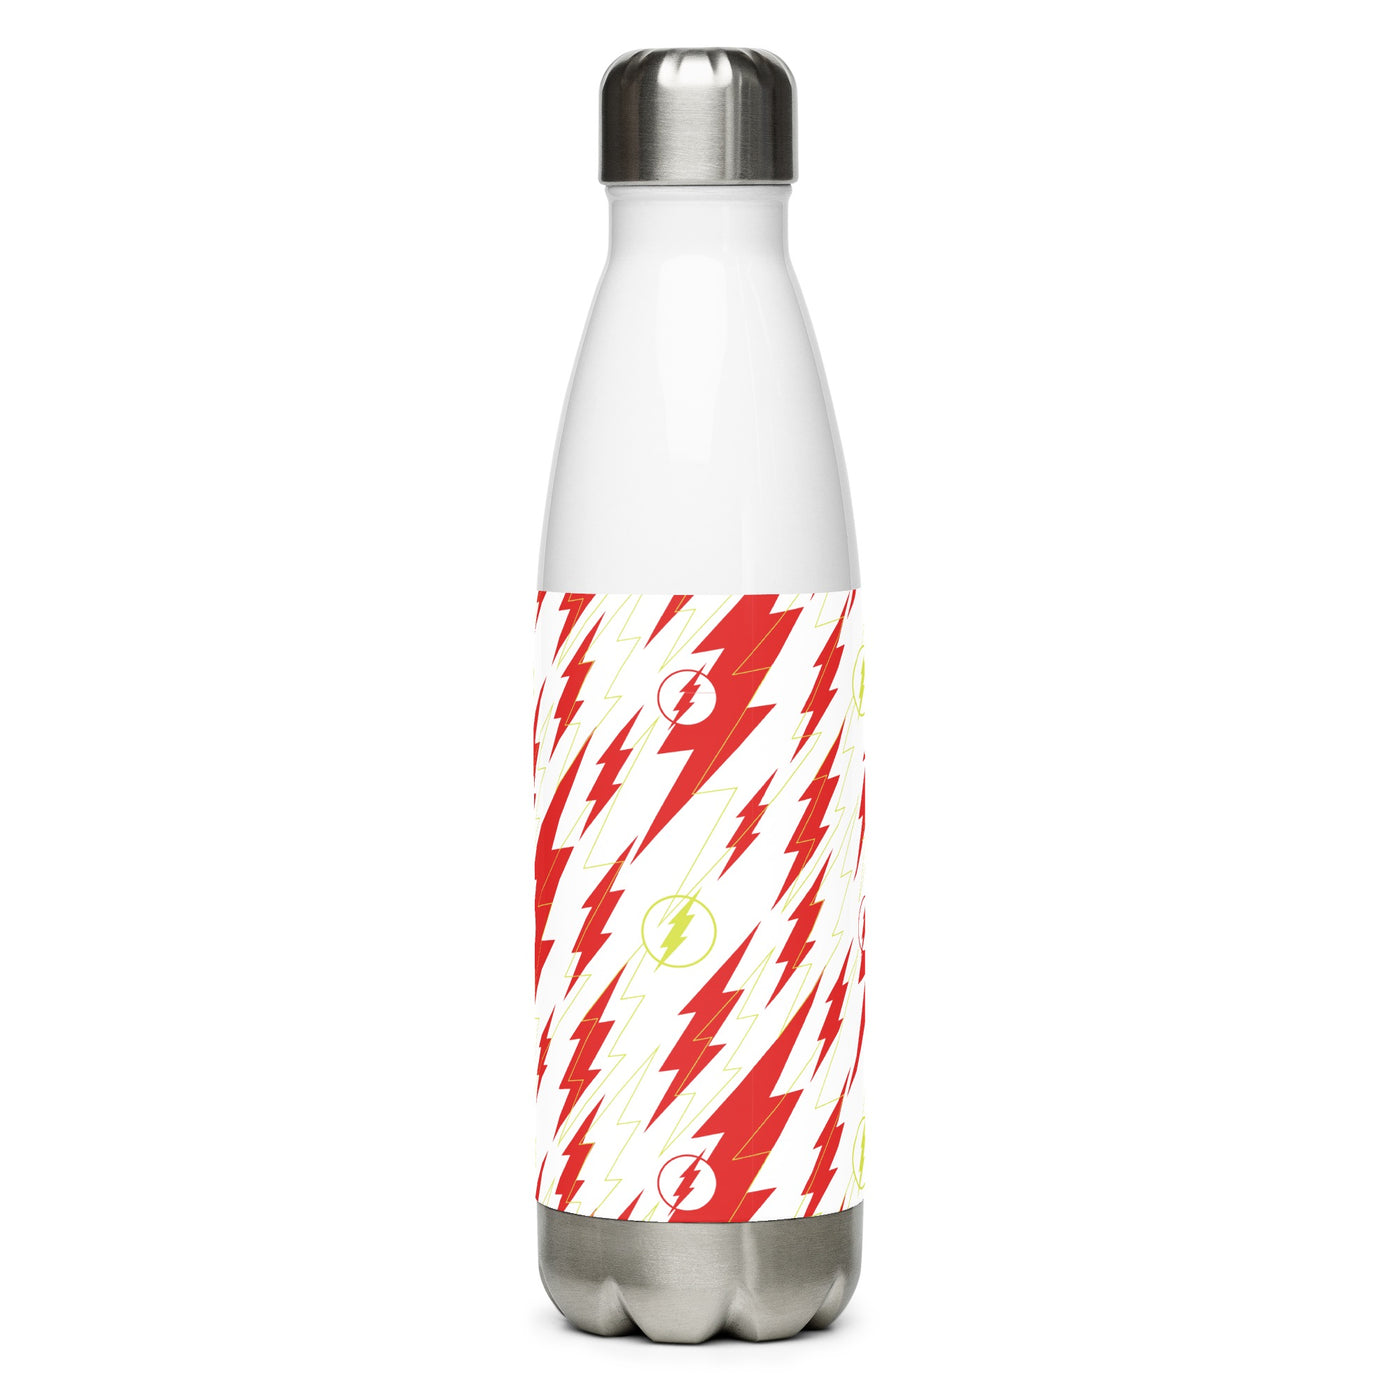 The Flash Pattern Stainless Steel Water Bottle